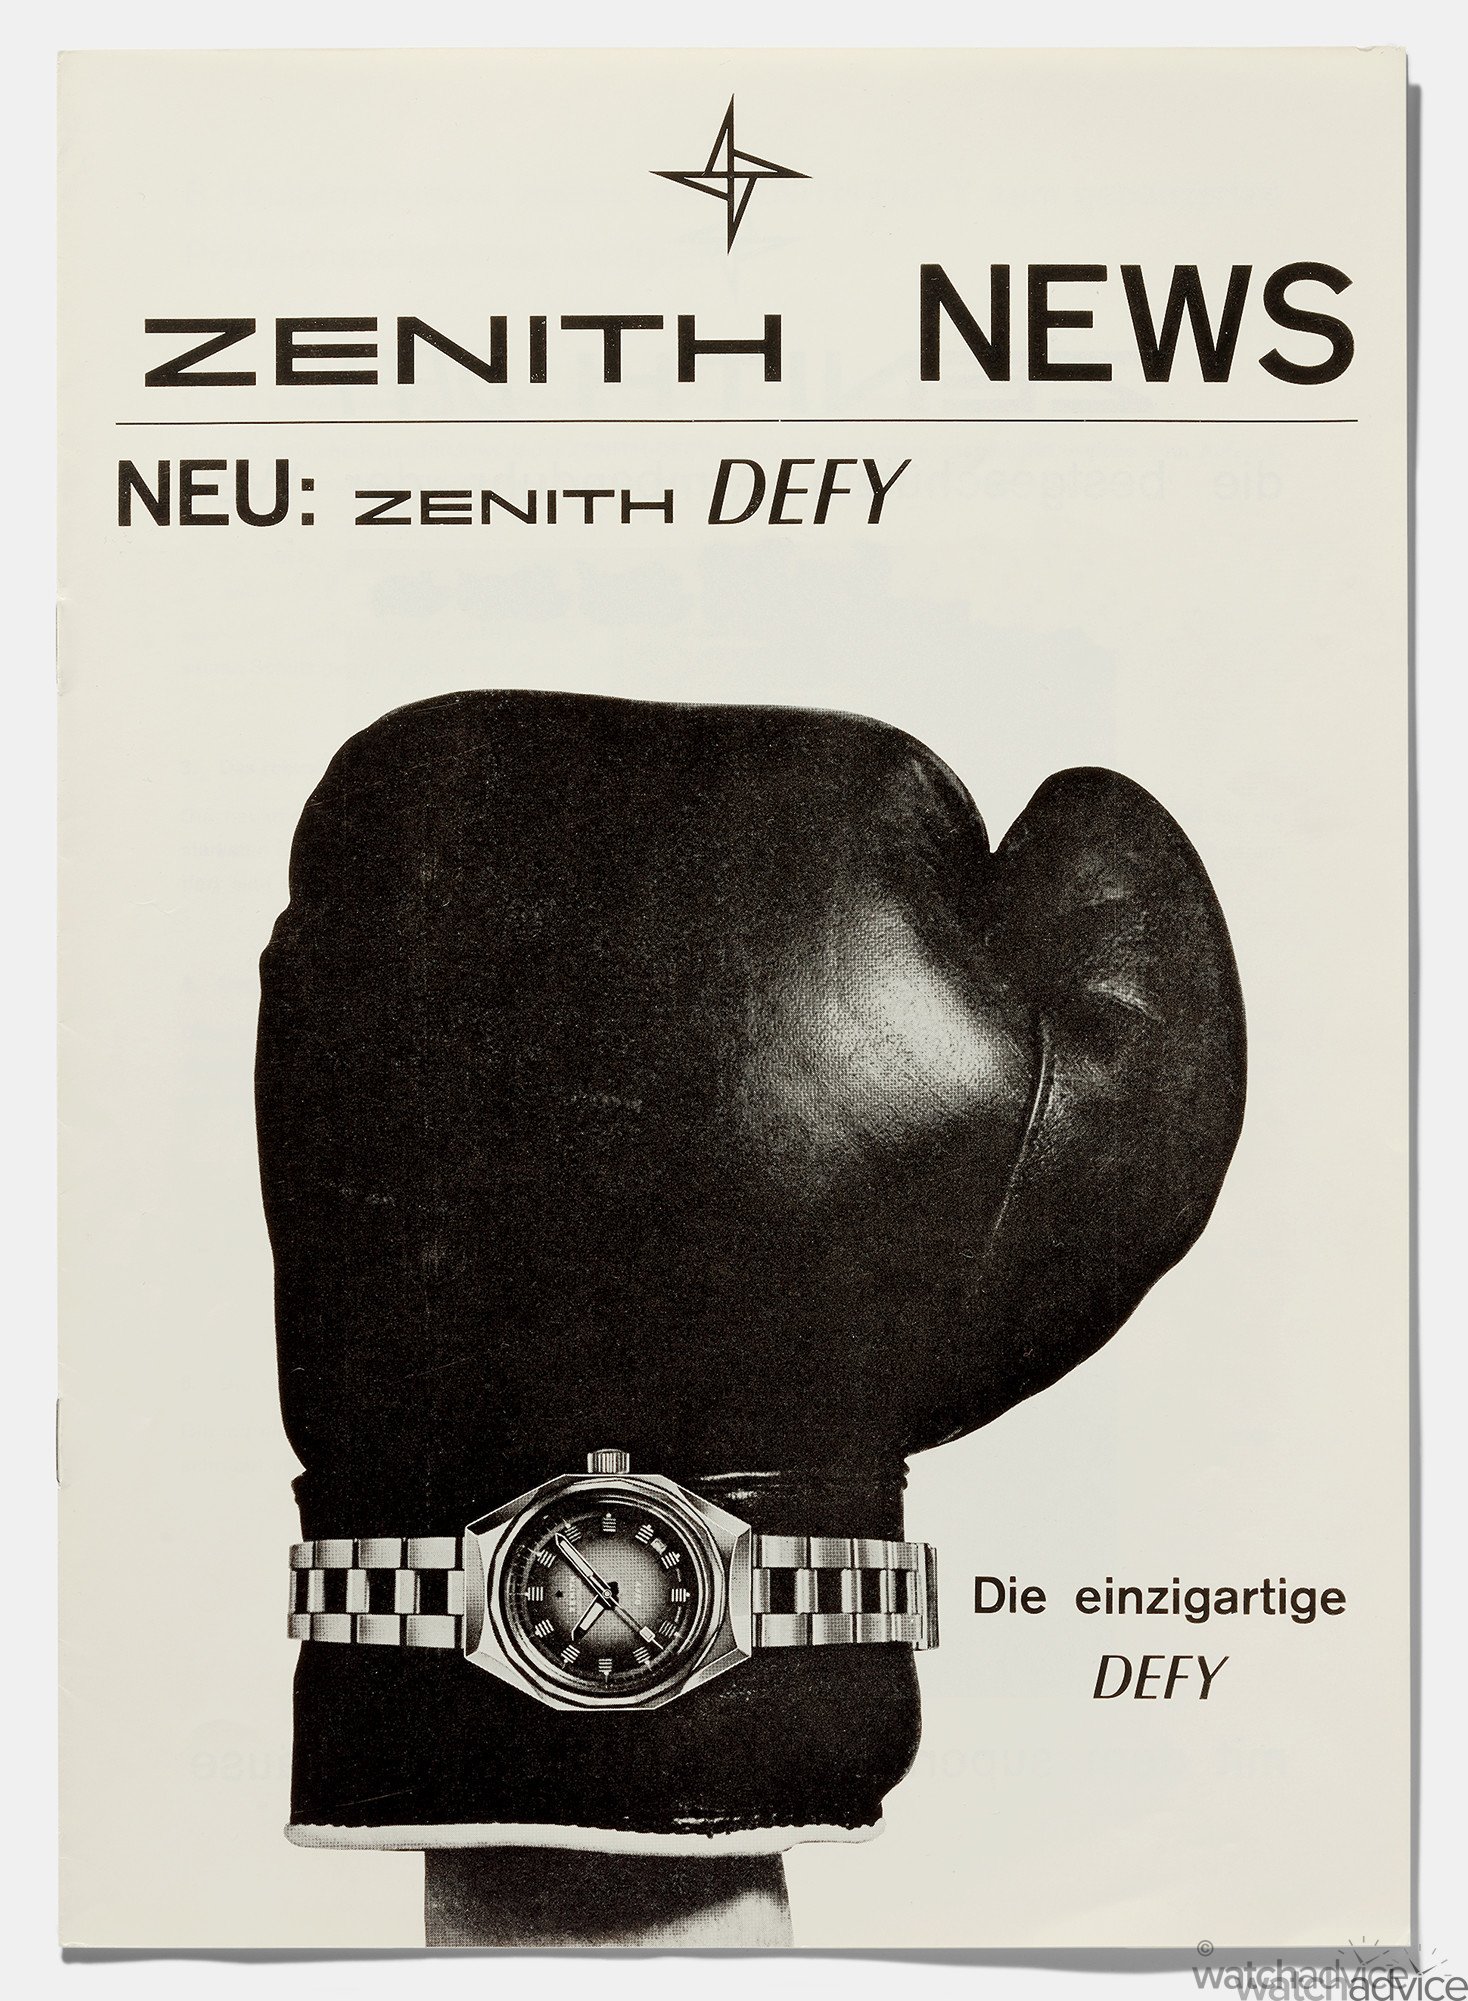 Zenith's New Revival A3642 Watch Brings Back Its Original Defy